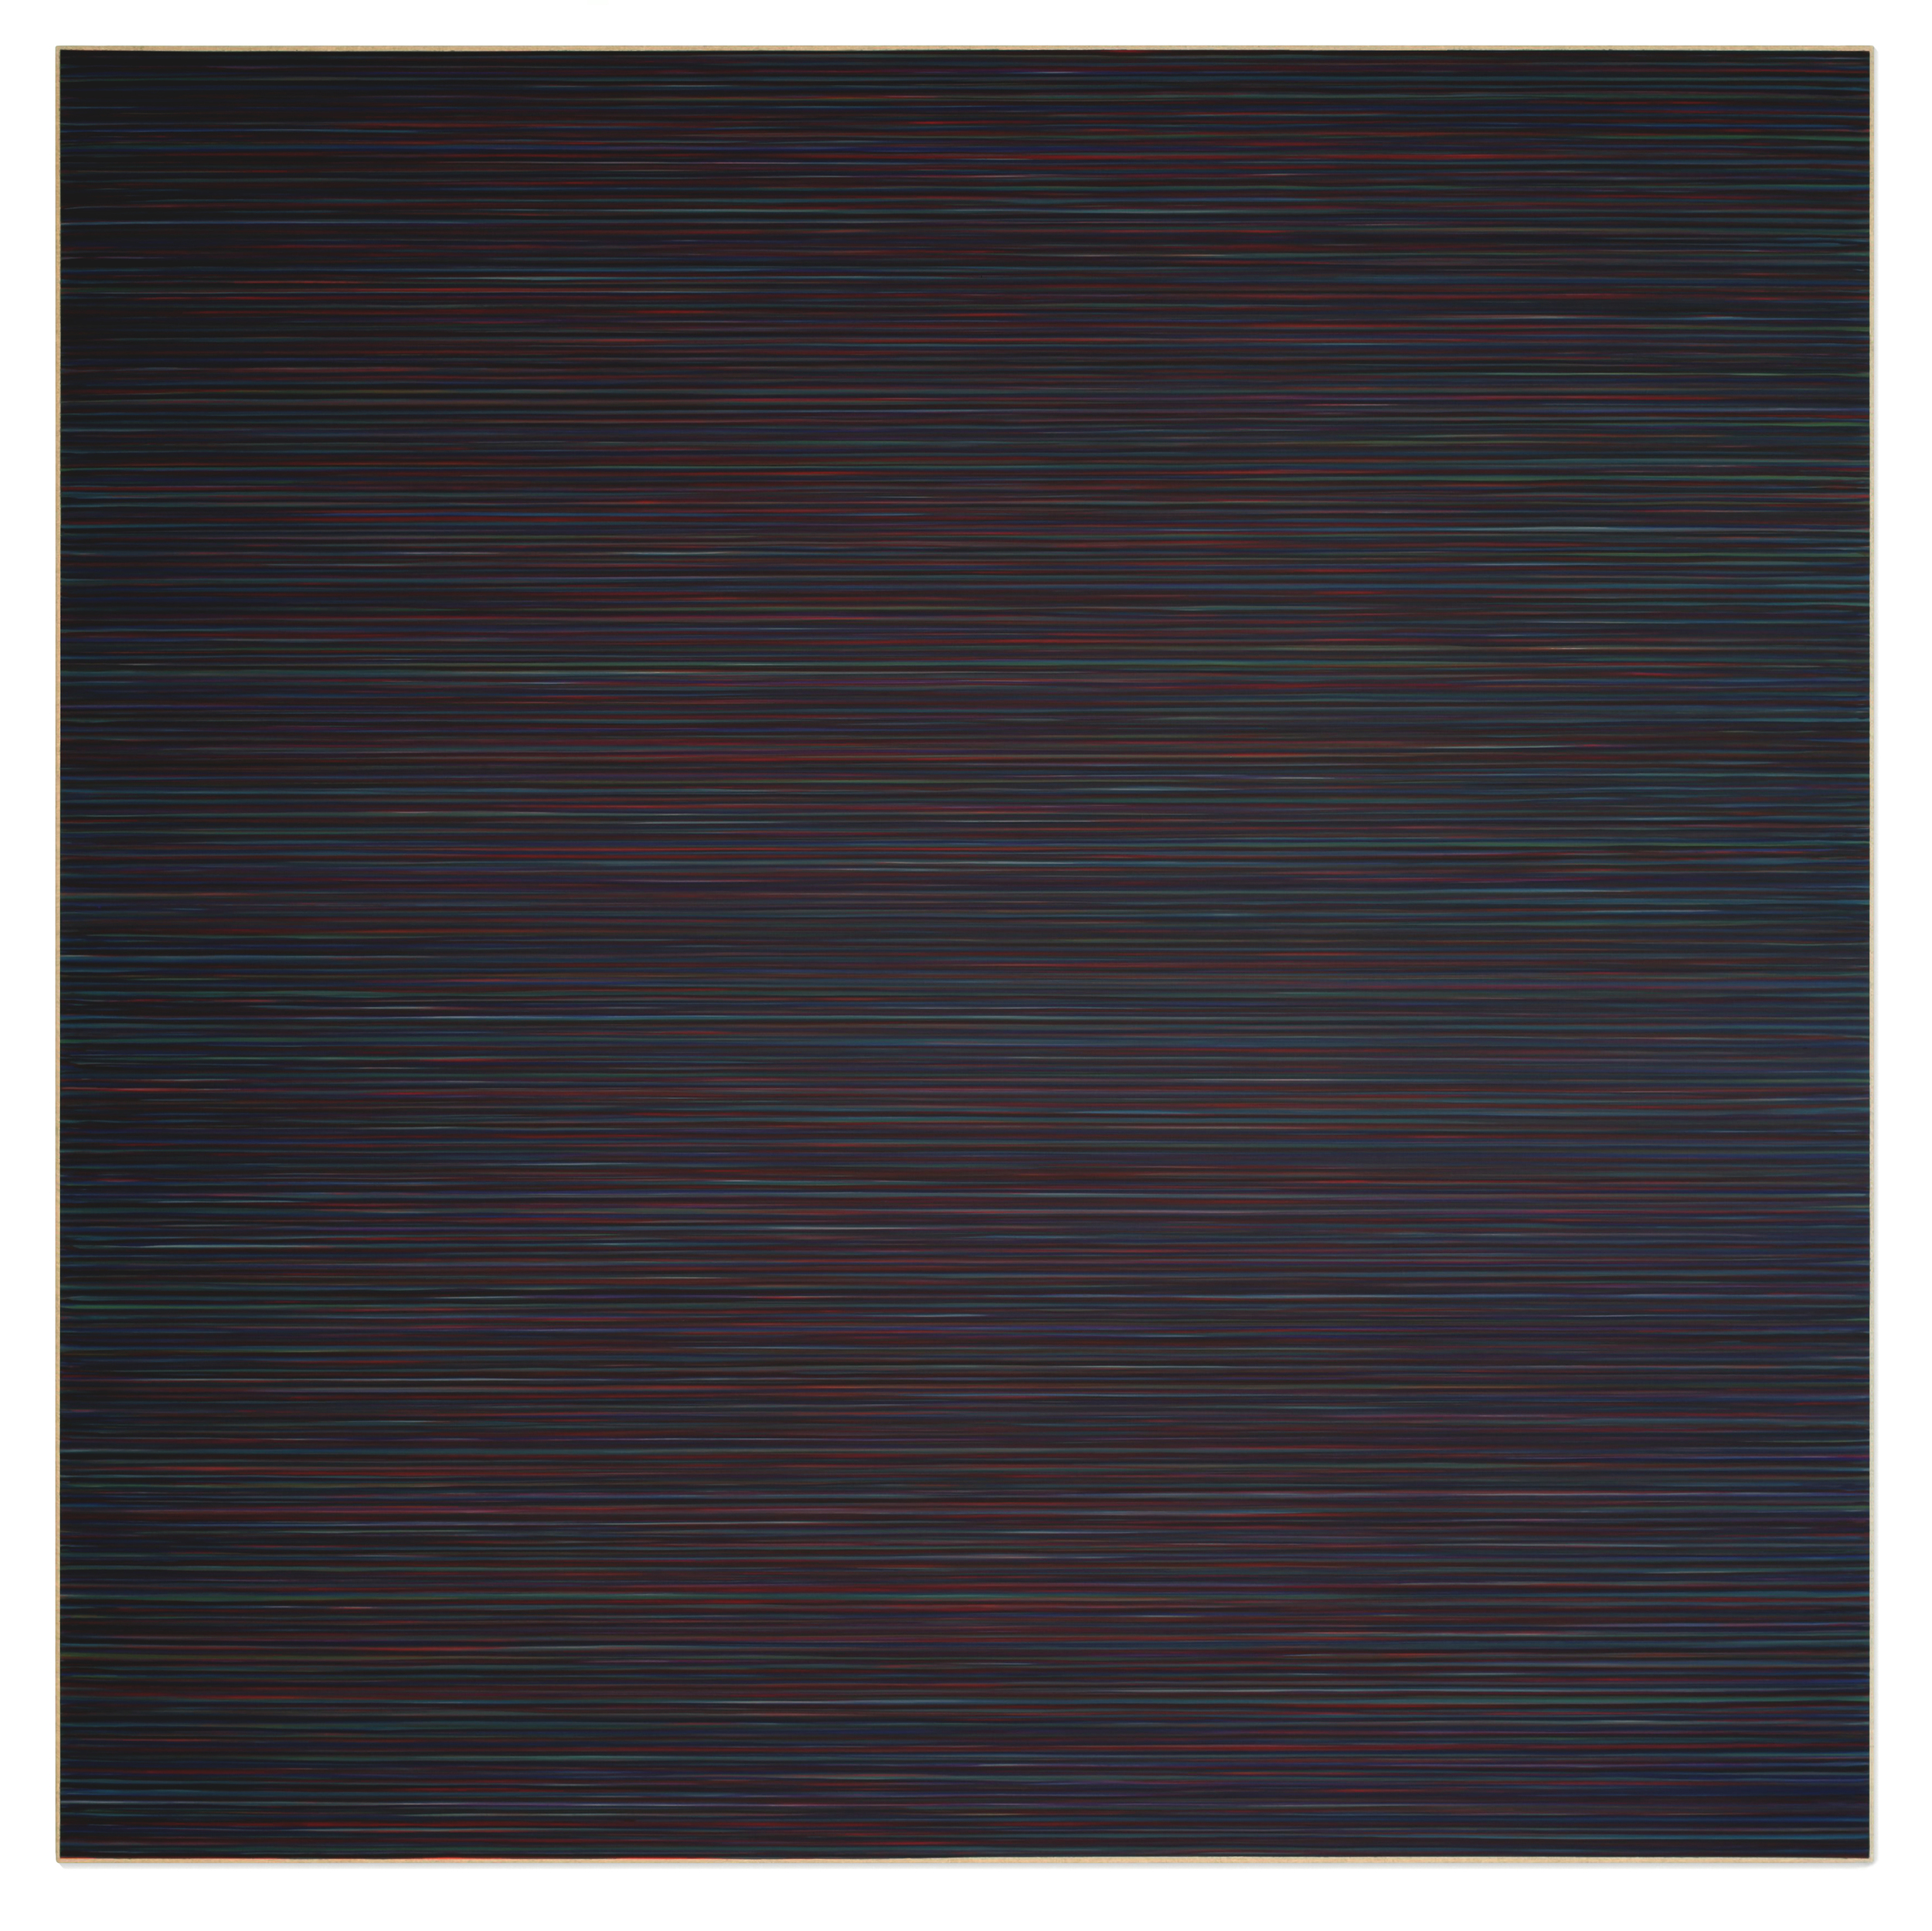 Untilted, 2014, 150x150 cm, 59.05x59.05 in